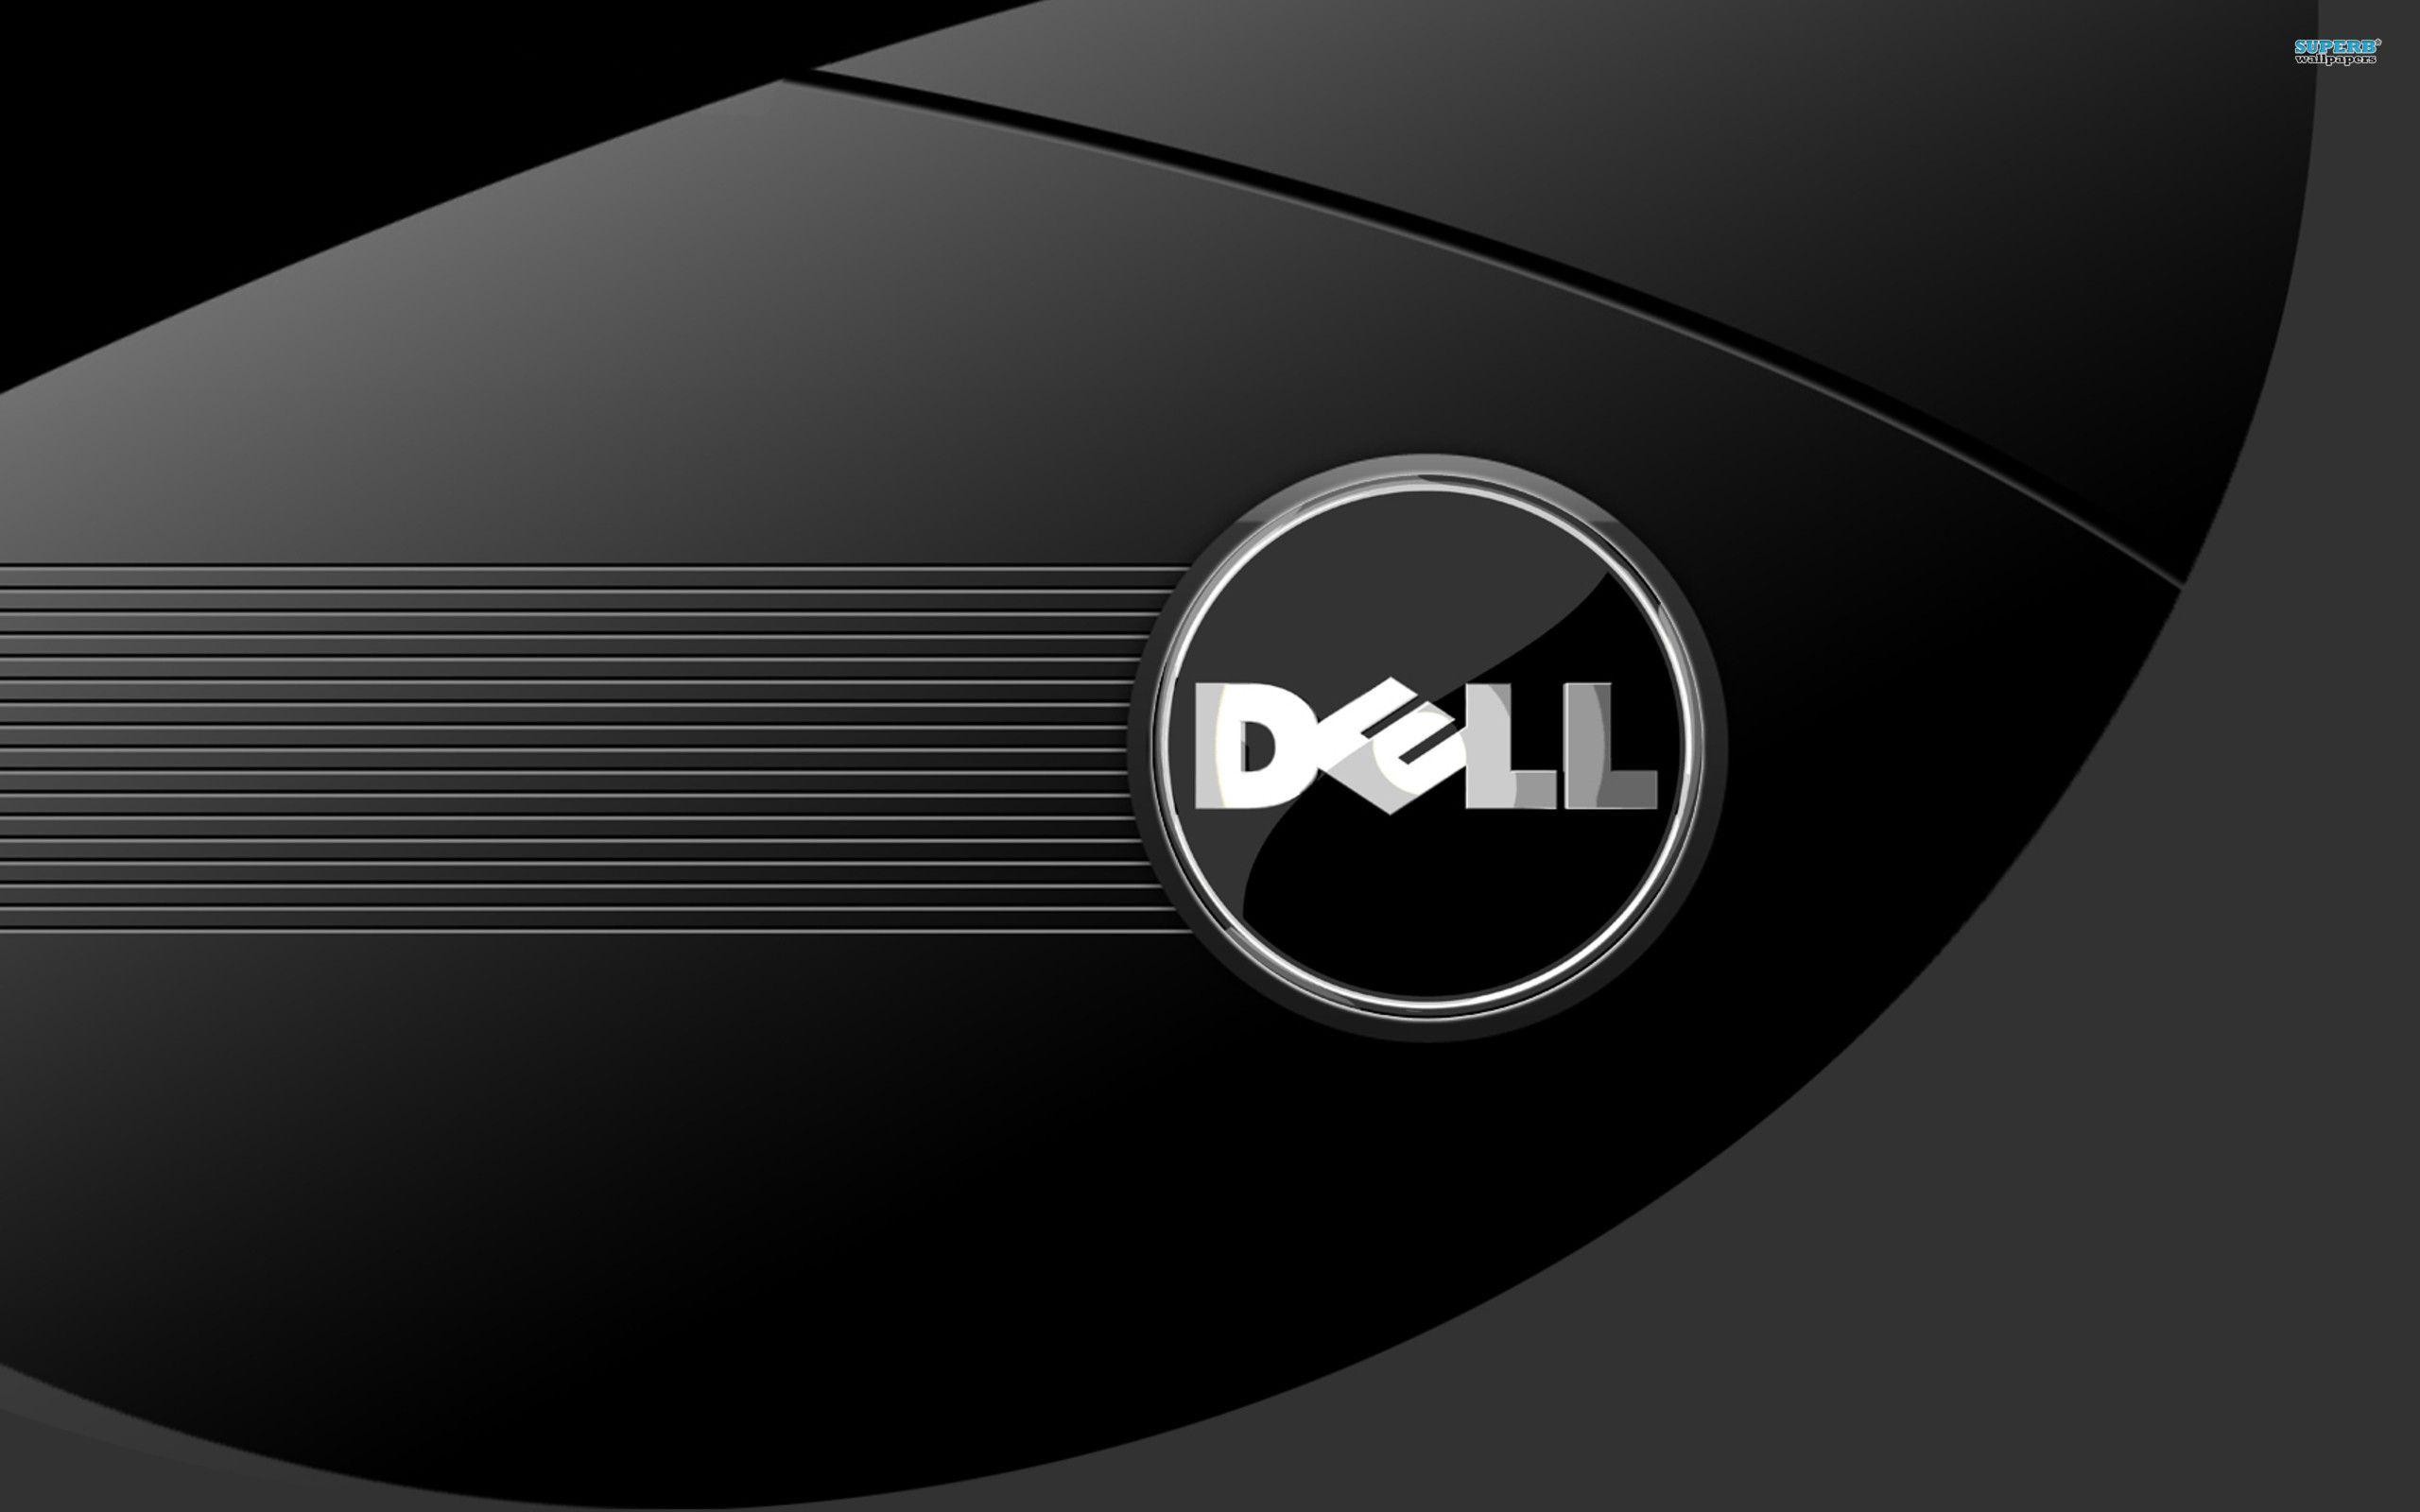 2560x1600 Dell Background Wallpapers - Full HD wallpaper search